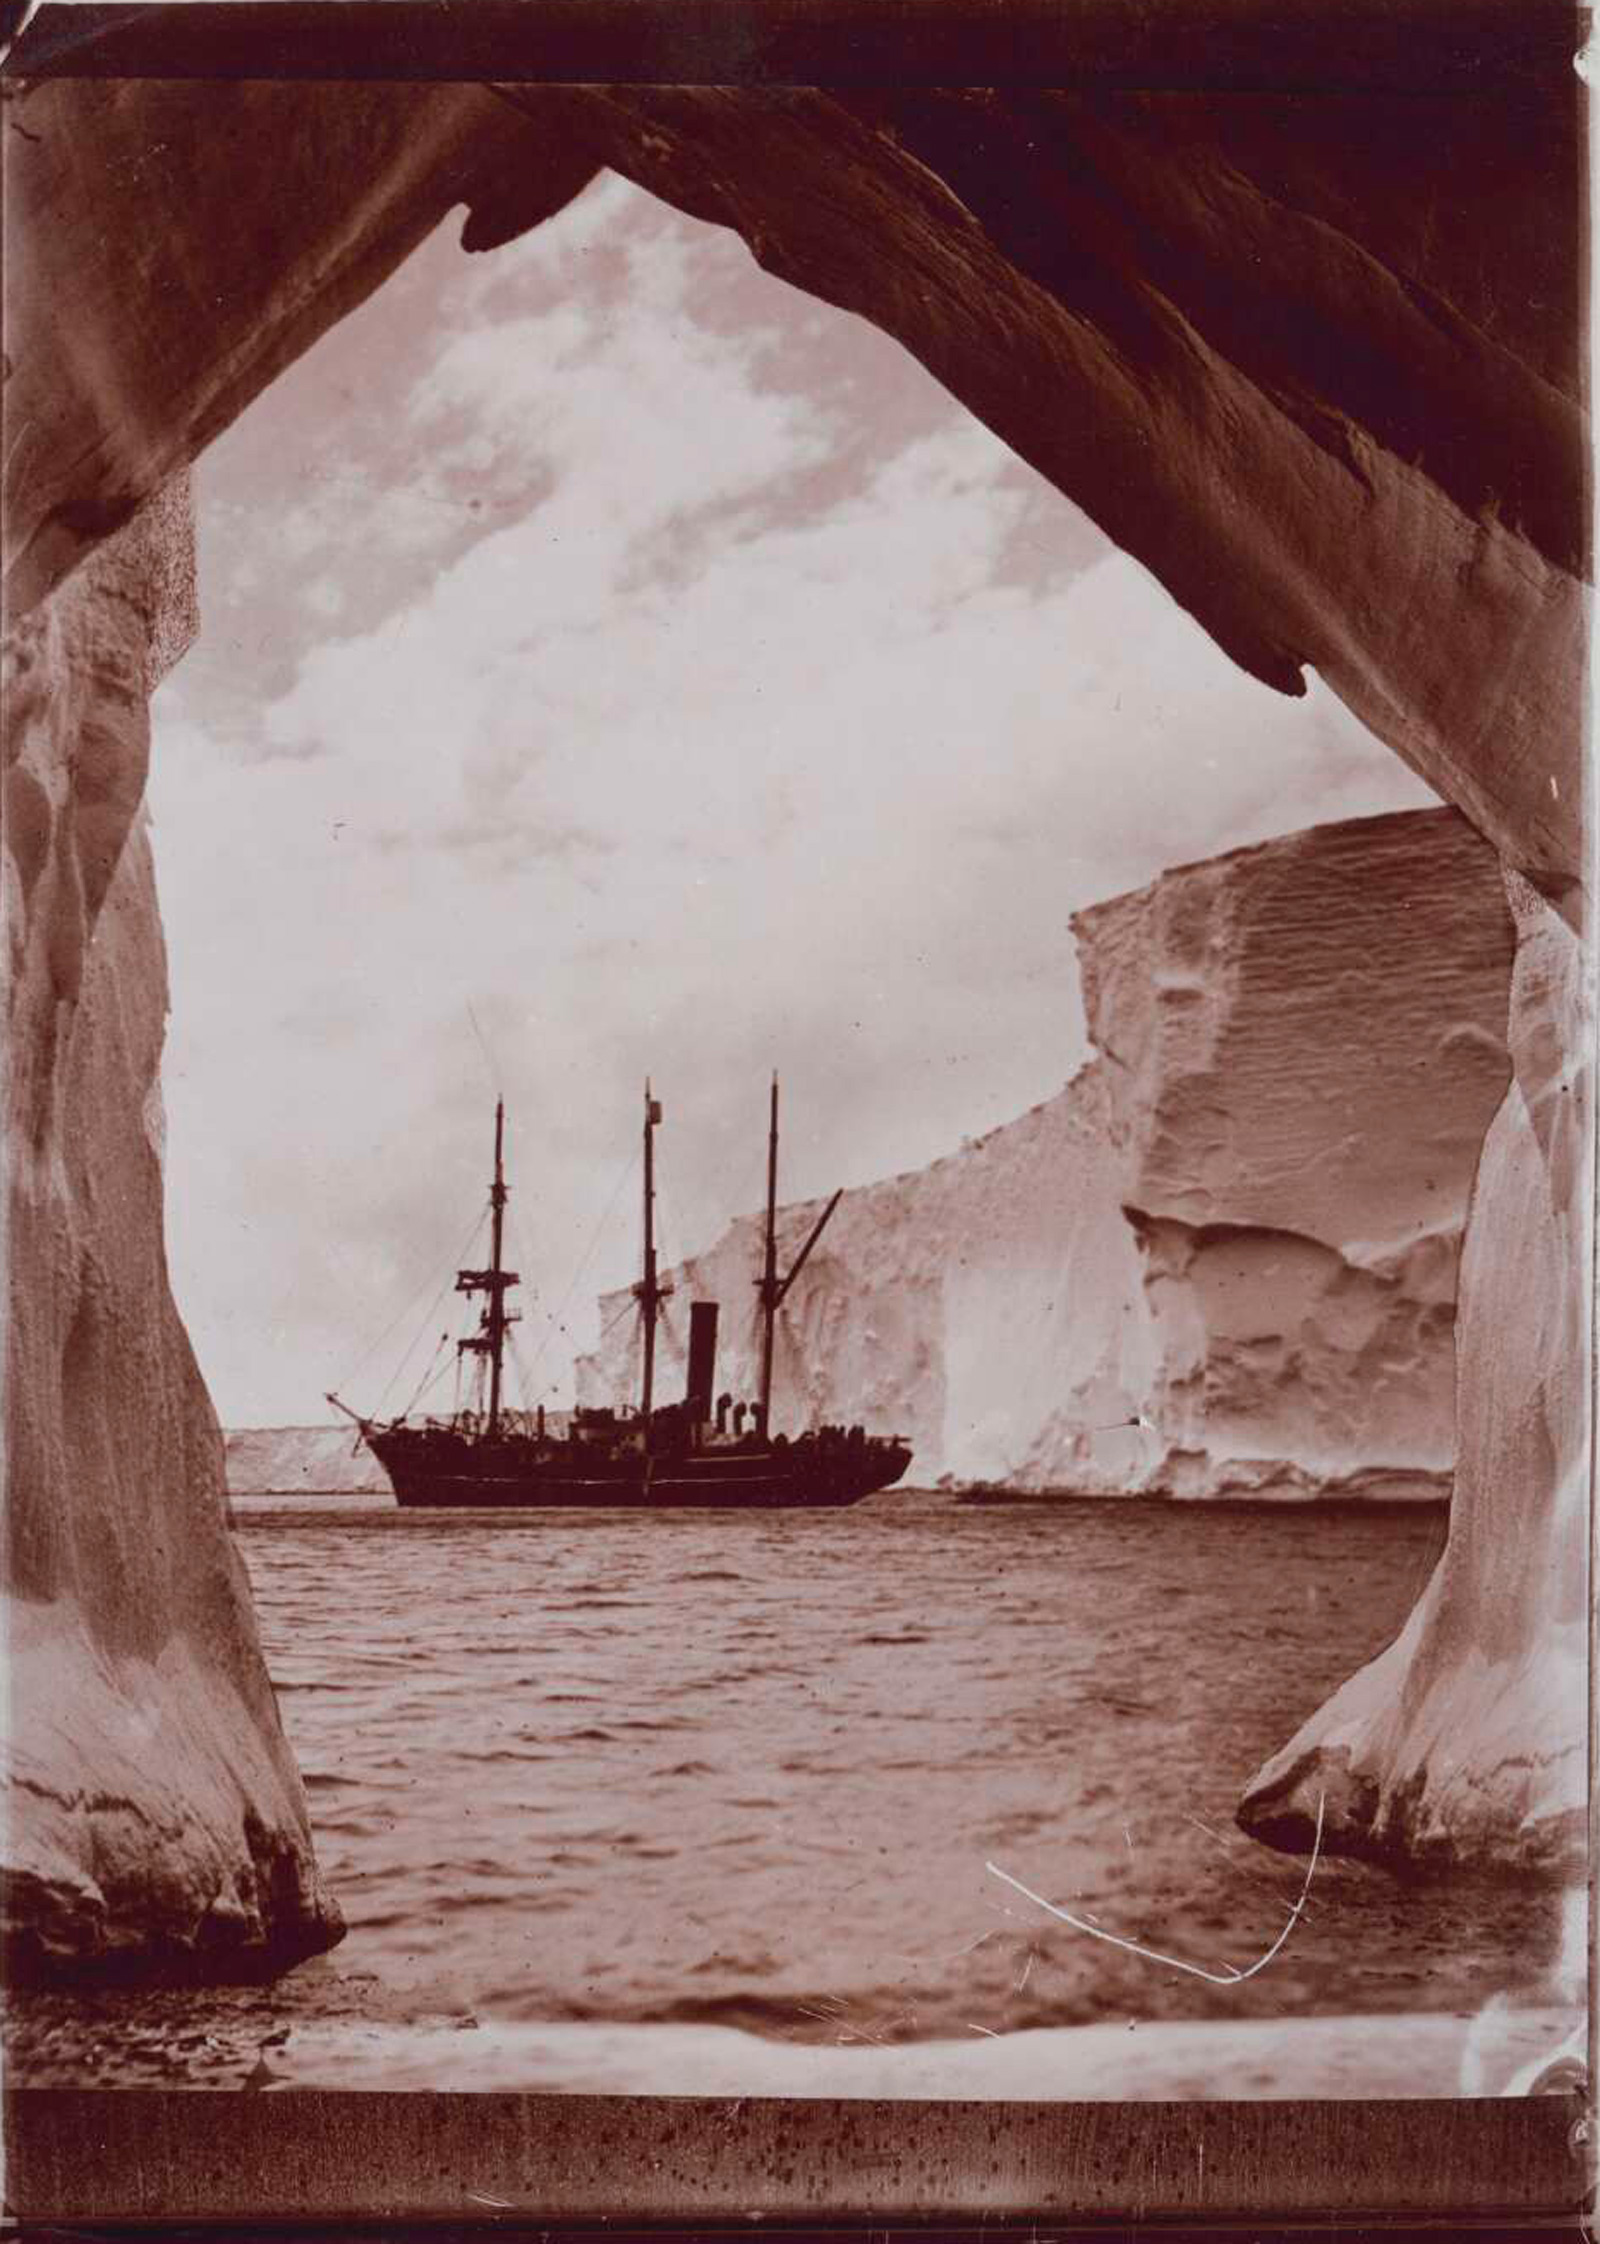 A glimpse from within the cavern of the Mertz Glacier, Australasian Antarctic Expedition, 1911–1914